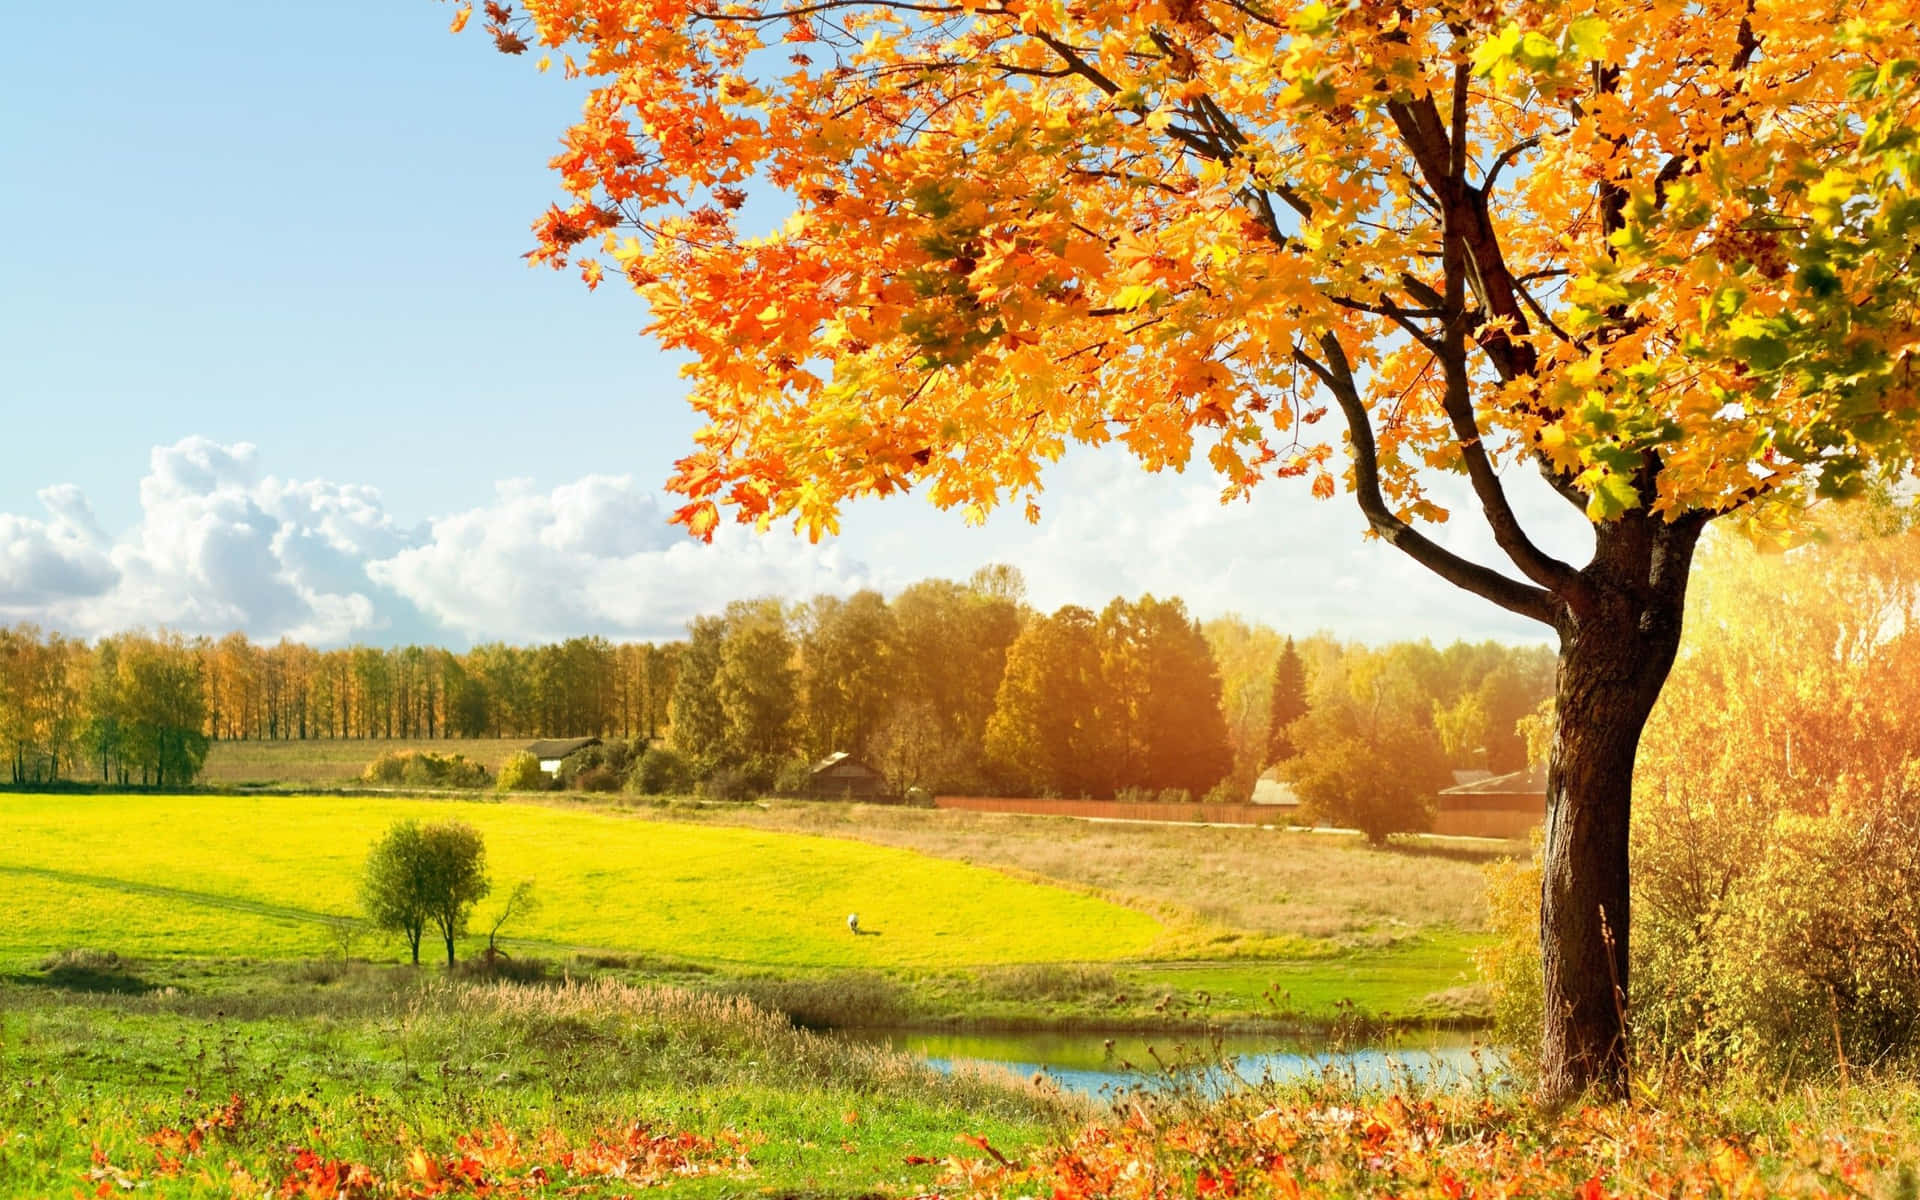 Great Sunny Day Landscape Field With Autumn Tree